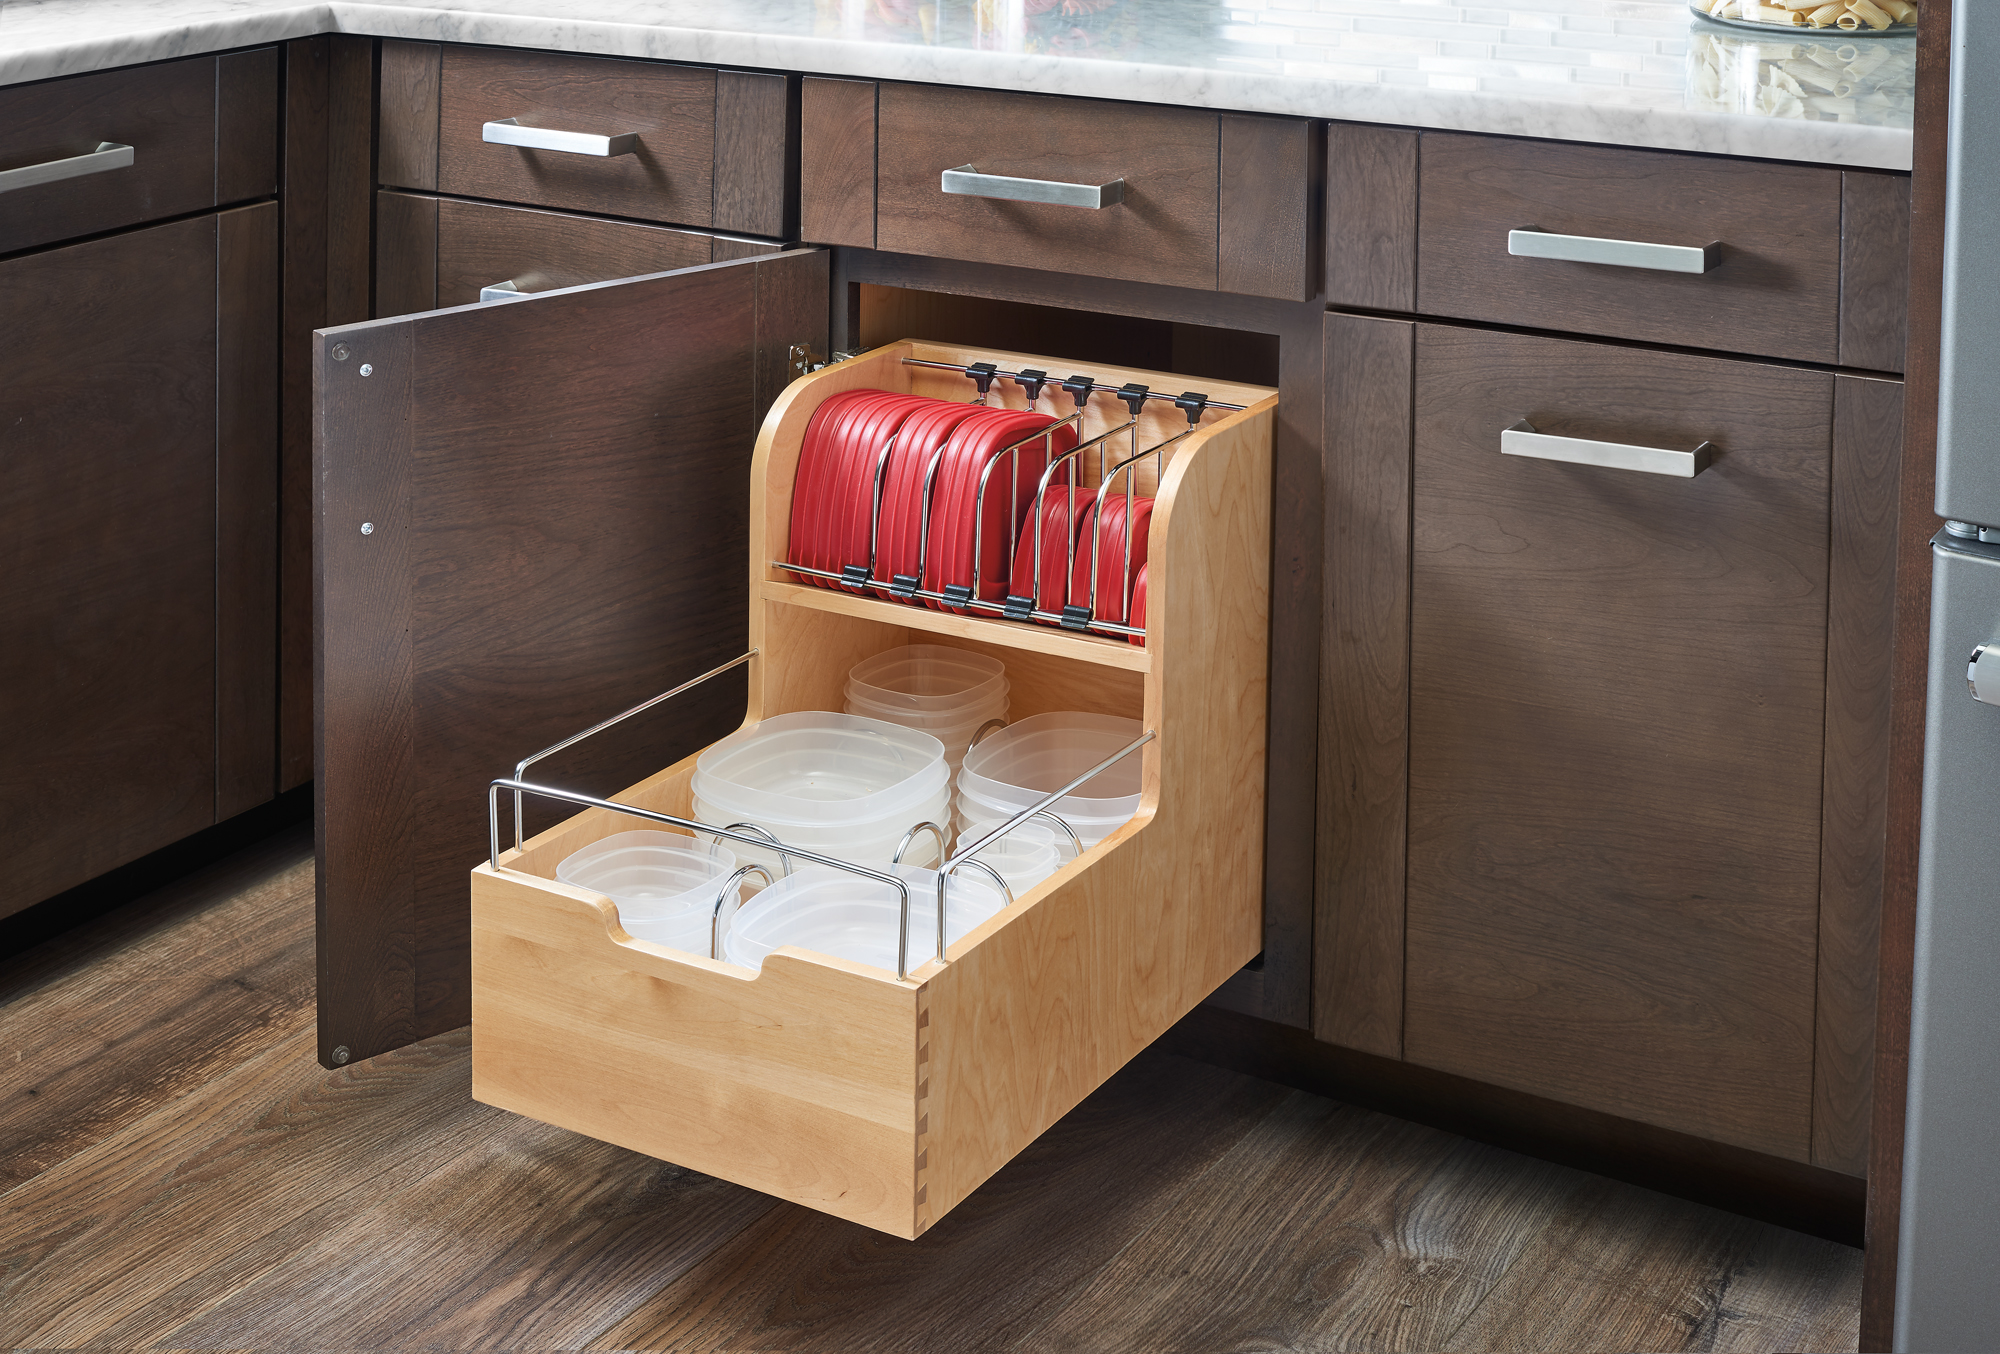 Ranking of the best kitchen storage containers for 2022